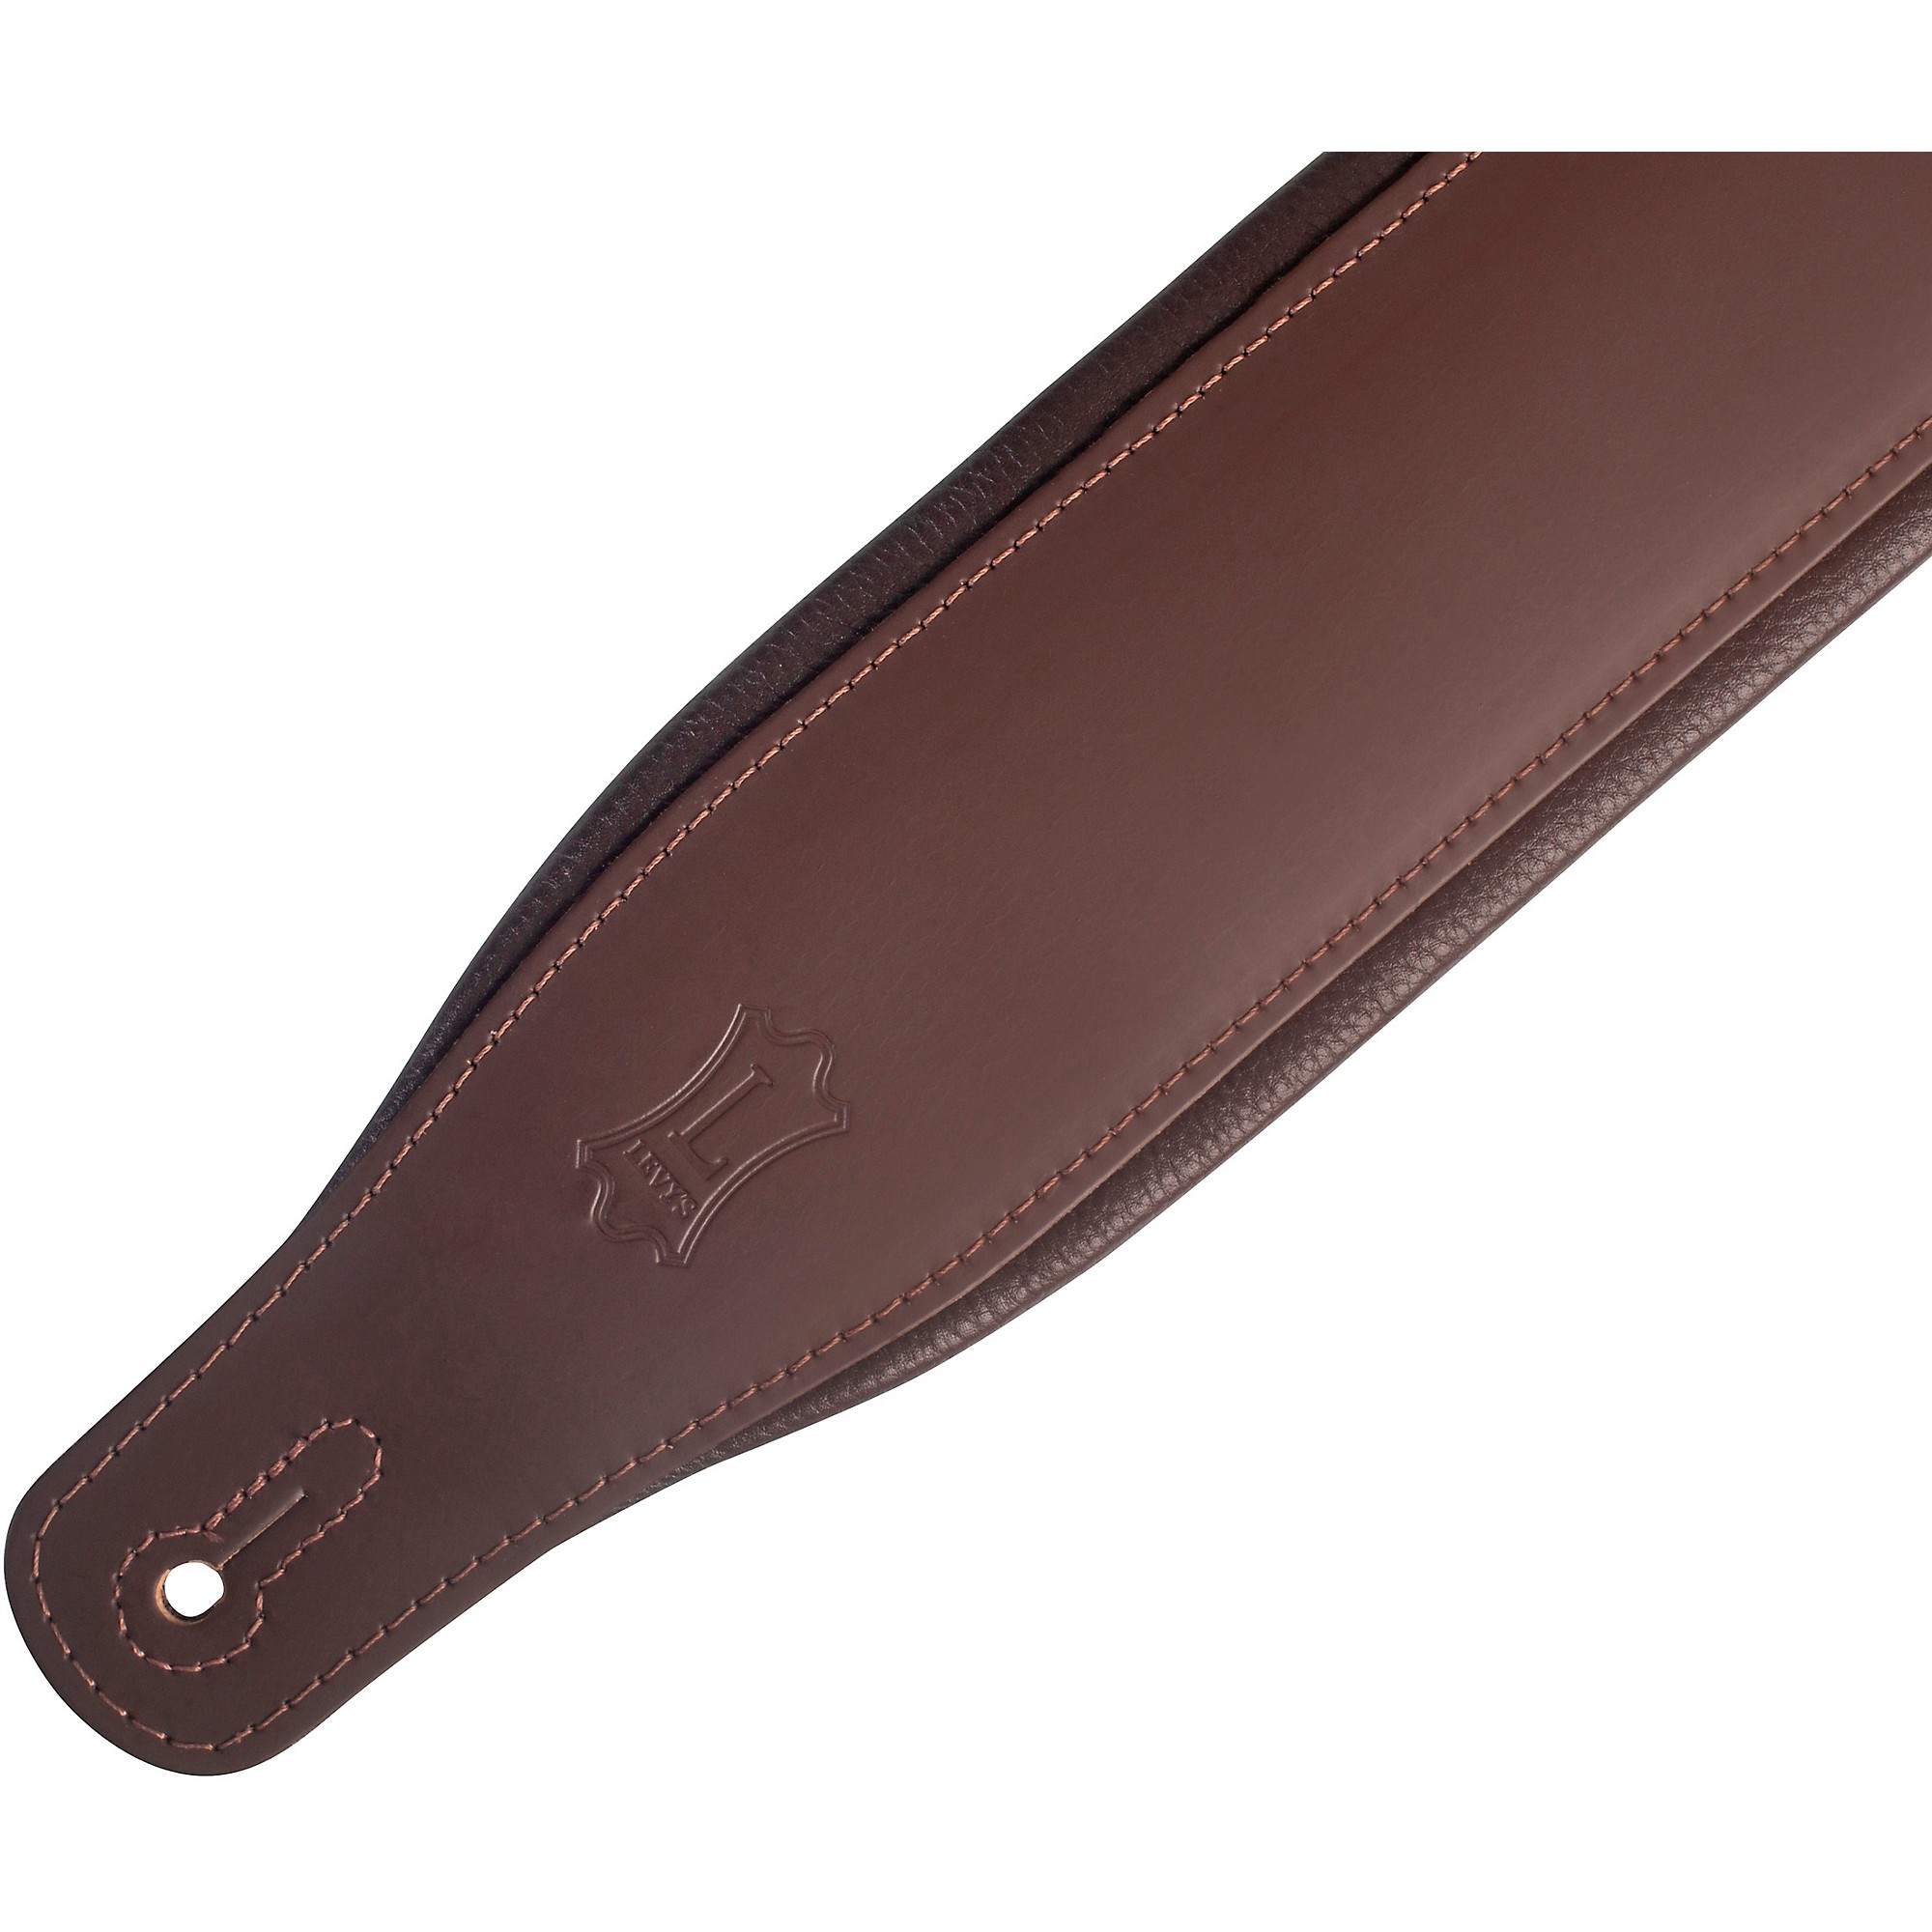 M26PD- Cuir - Dark Brown : Sangle Guitare Levy s 